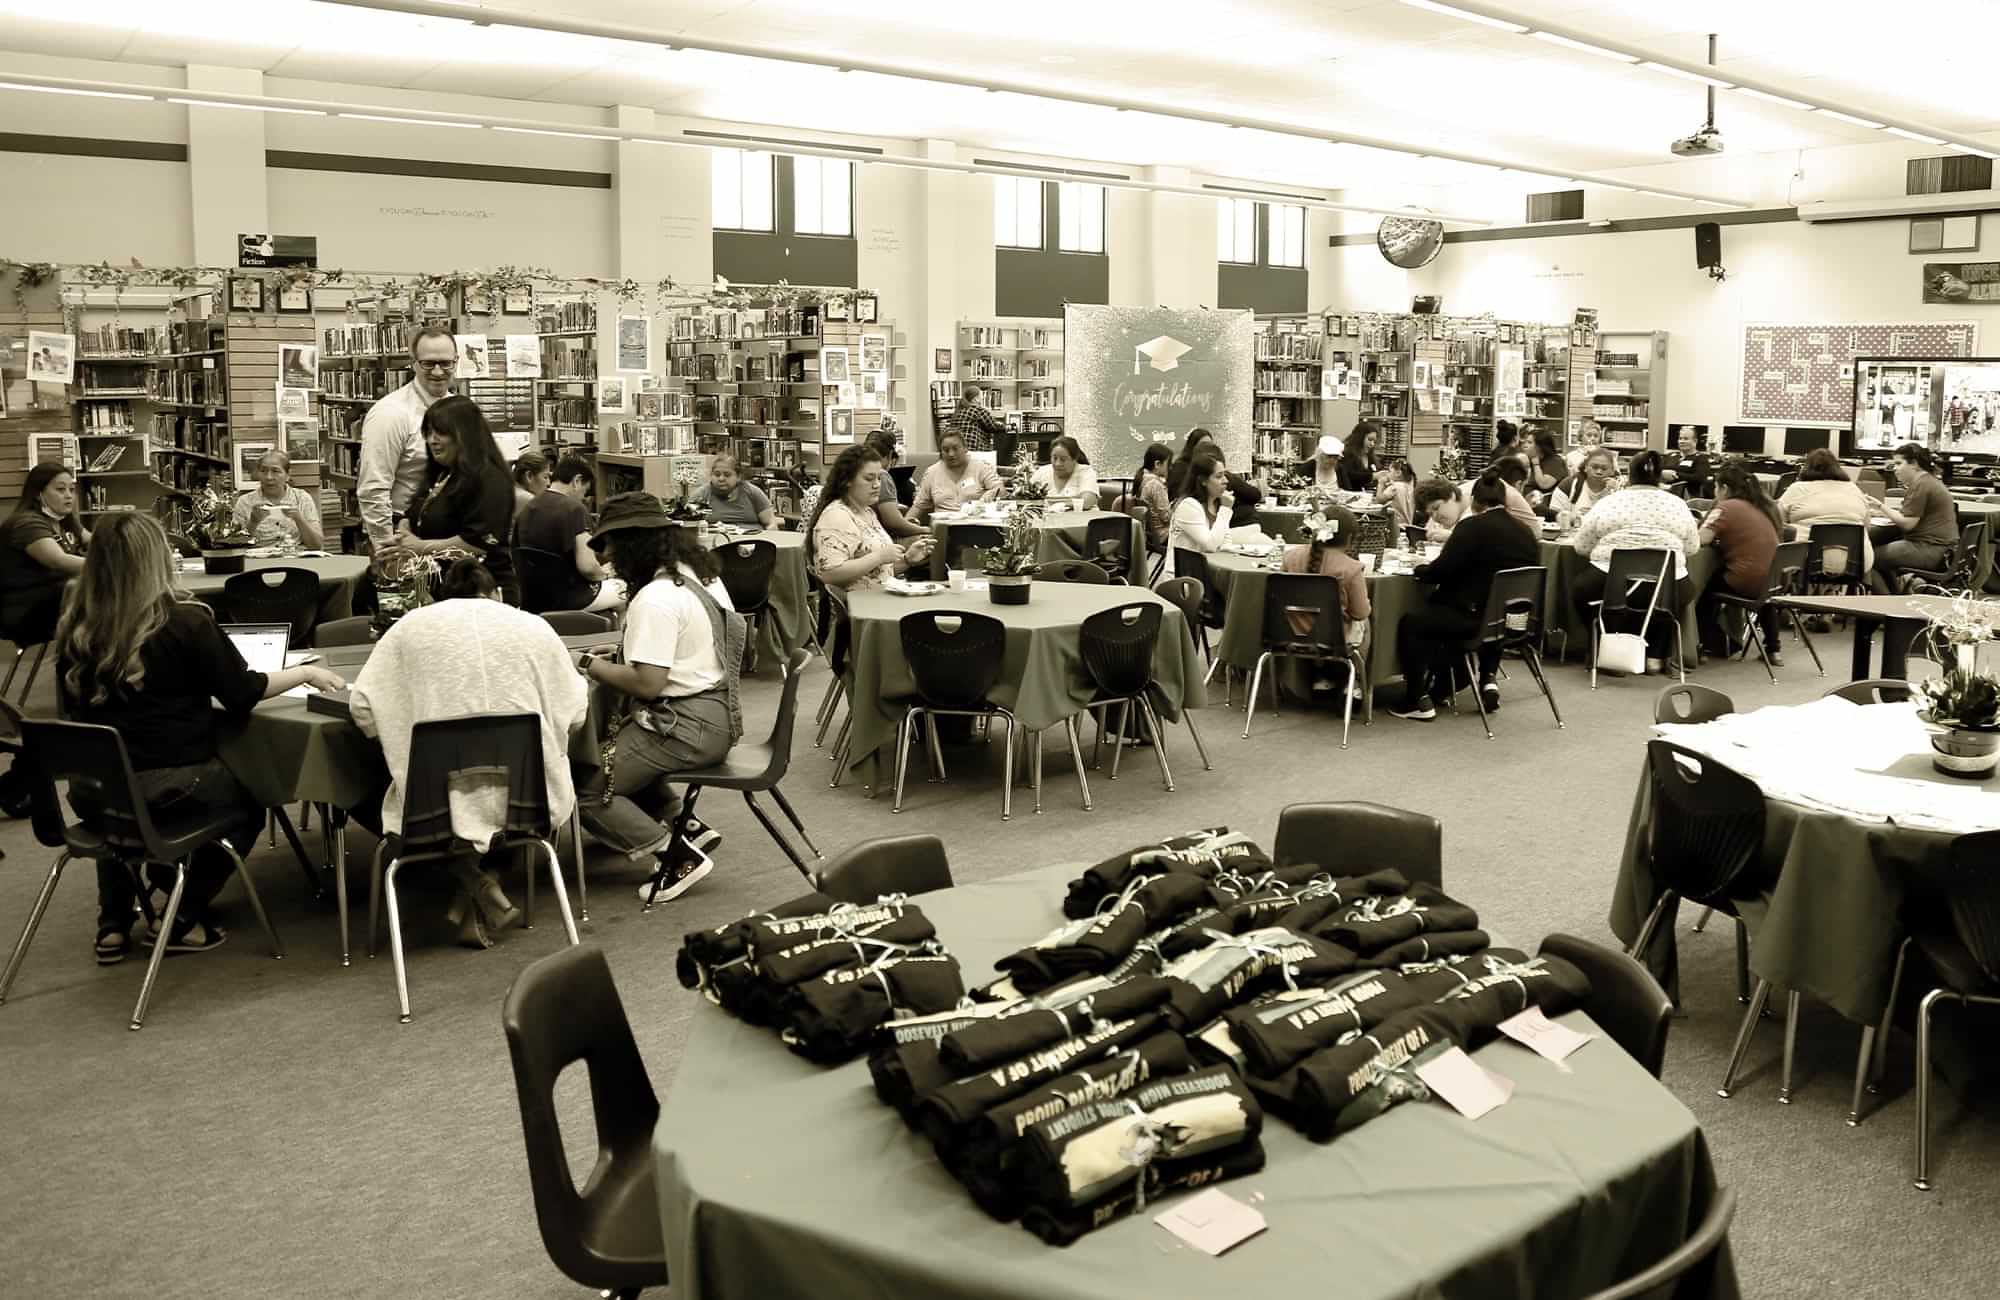 attendees sit at tables doing work at a Fresno Unified School District Parent University meeting held in a campus library